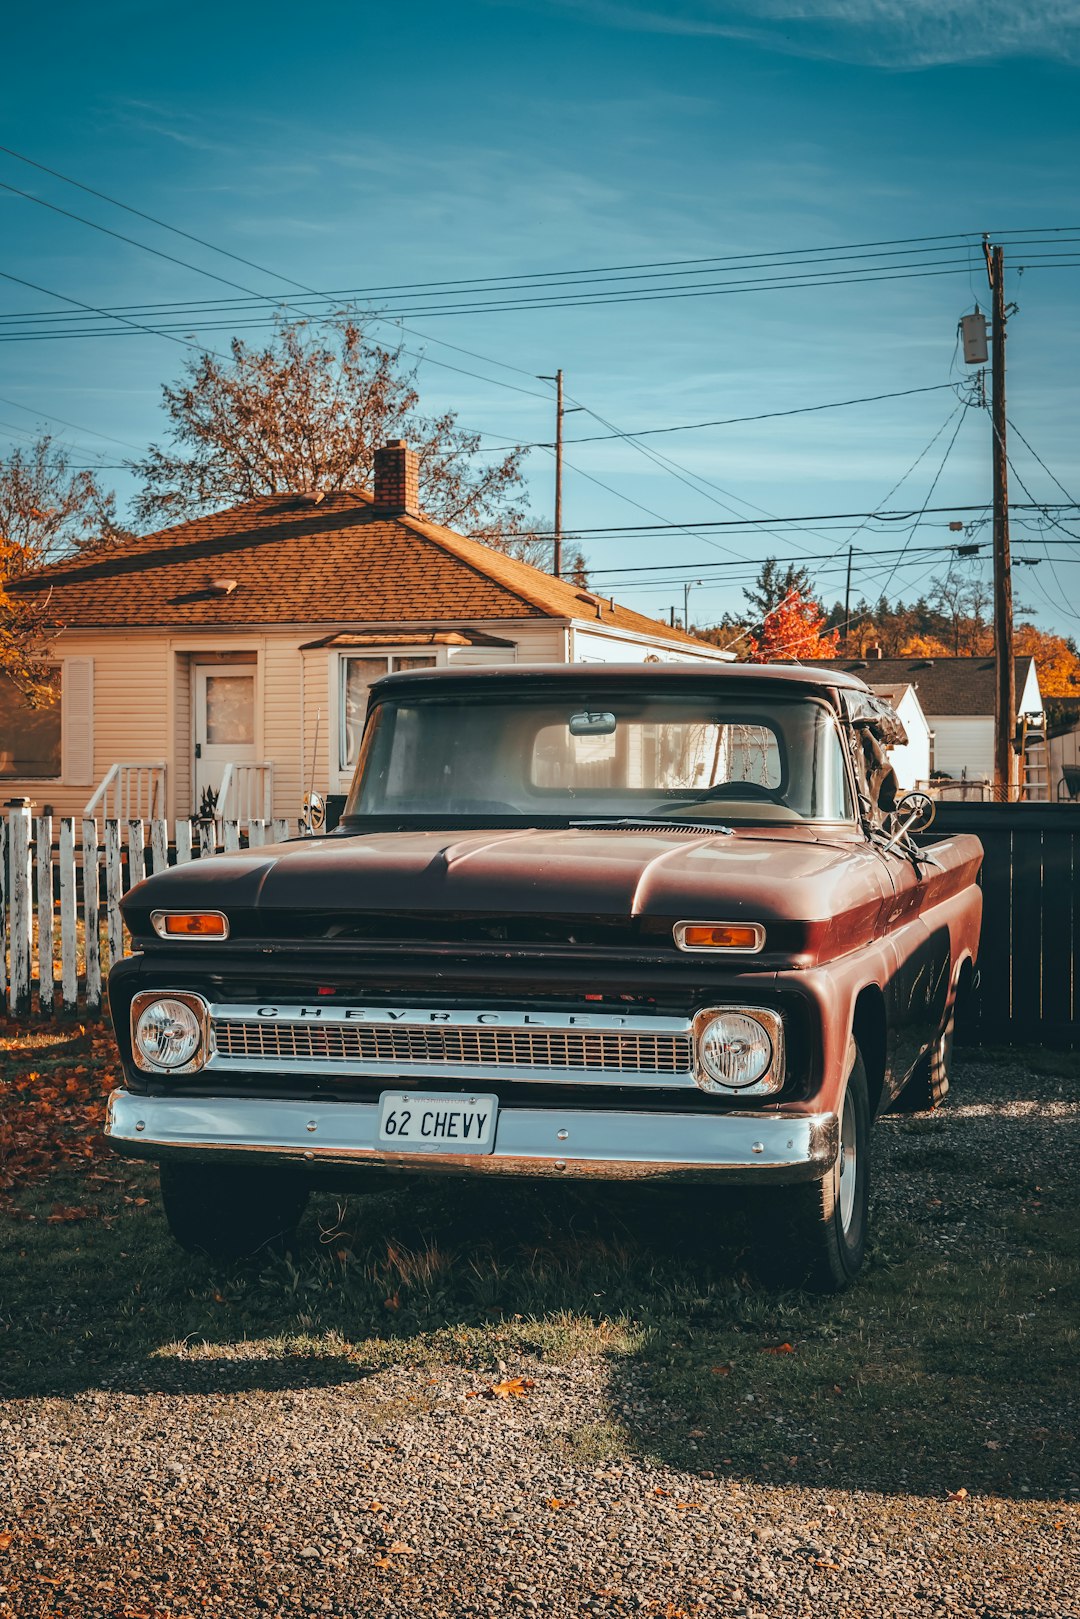 an old truck parked in a yard next to a house